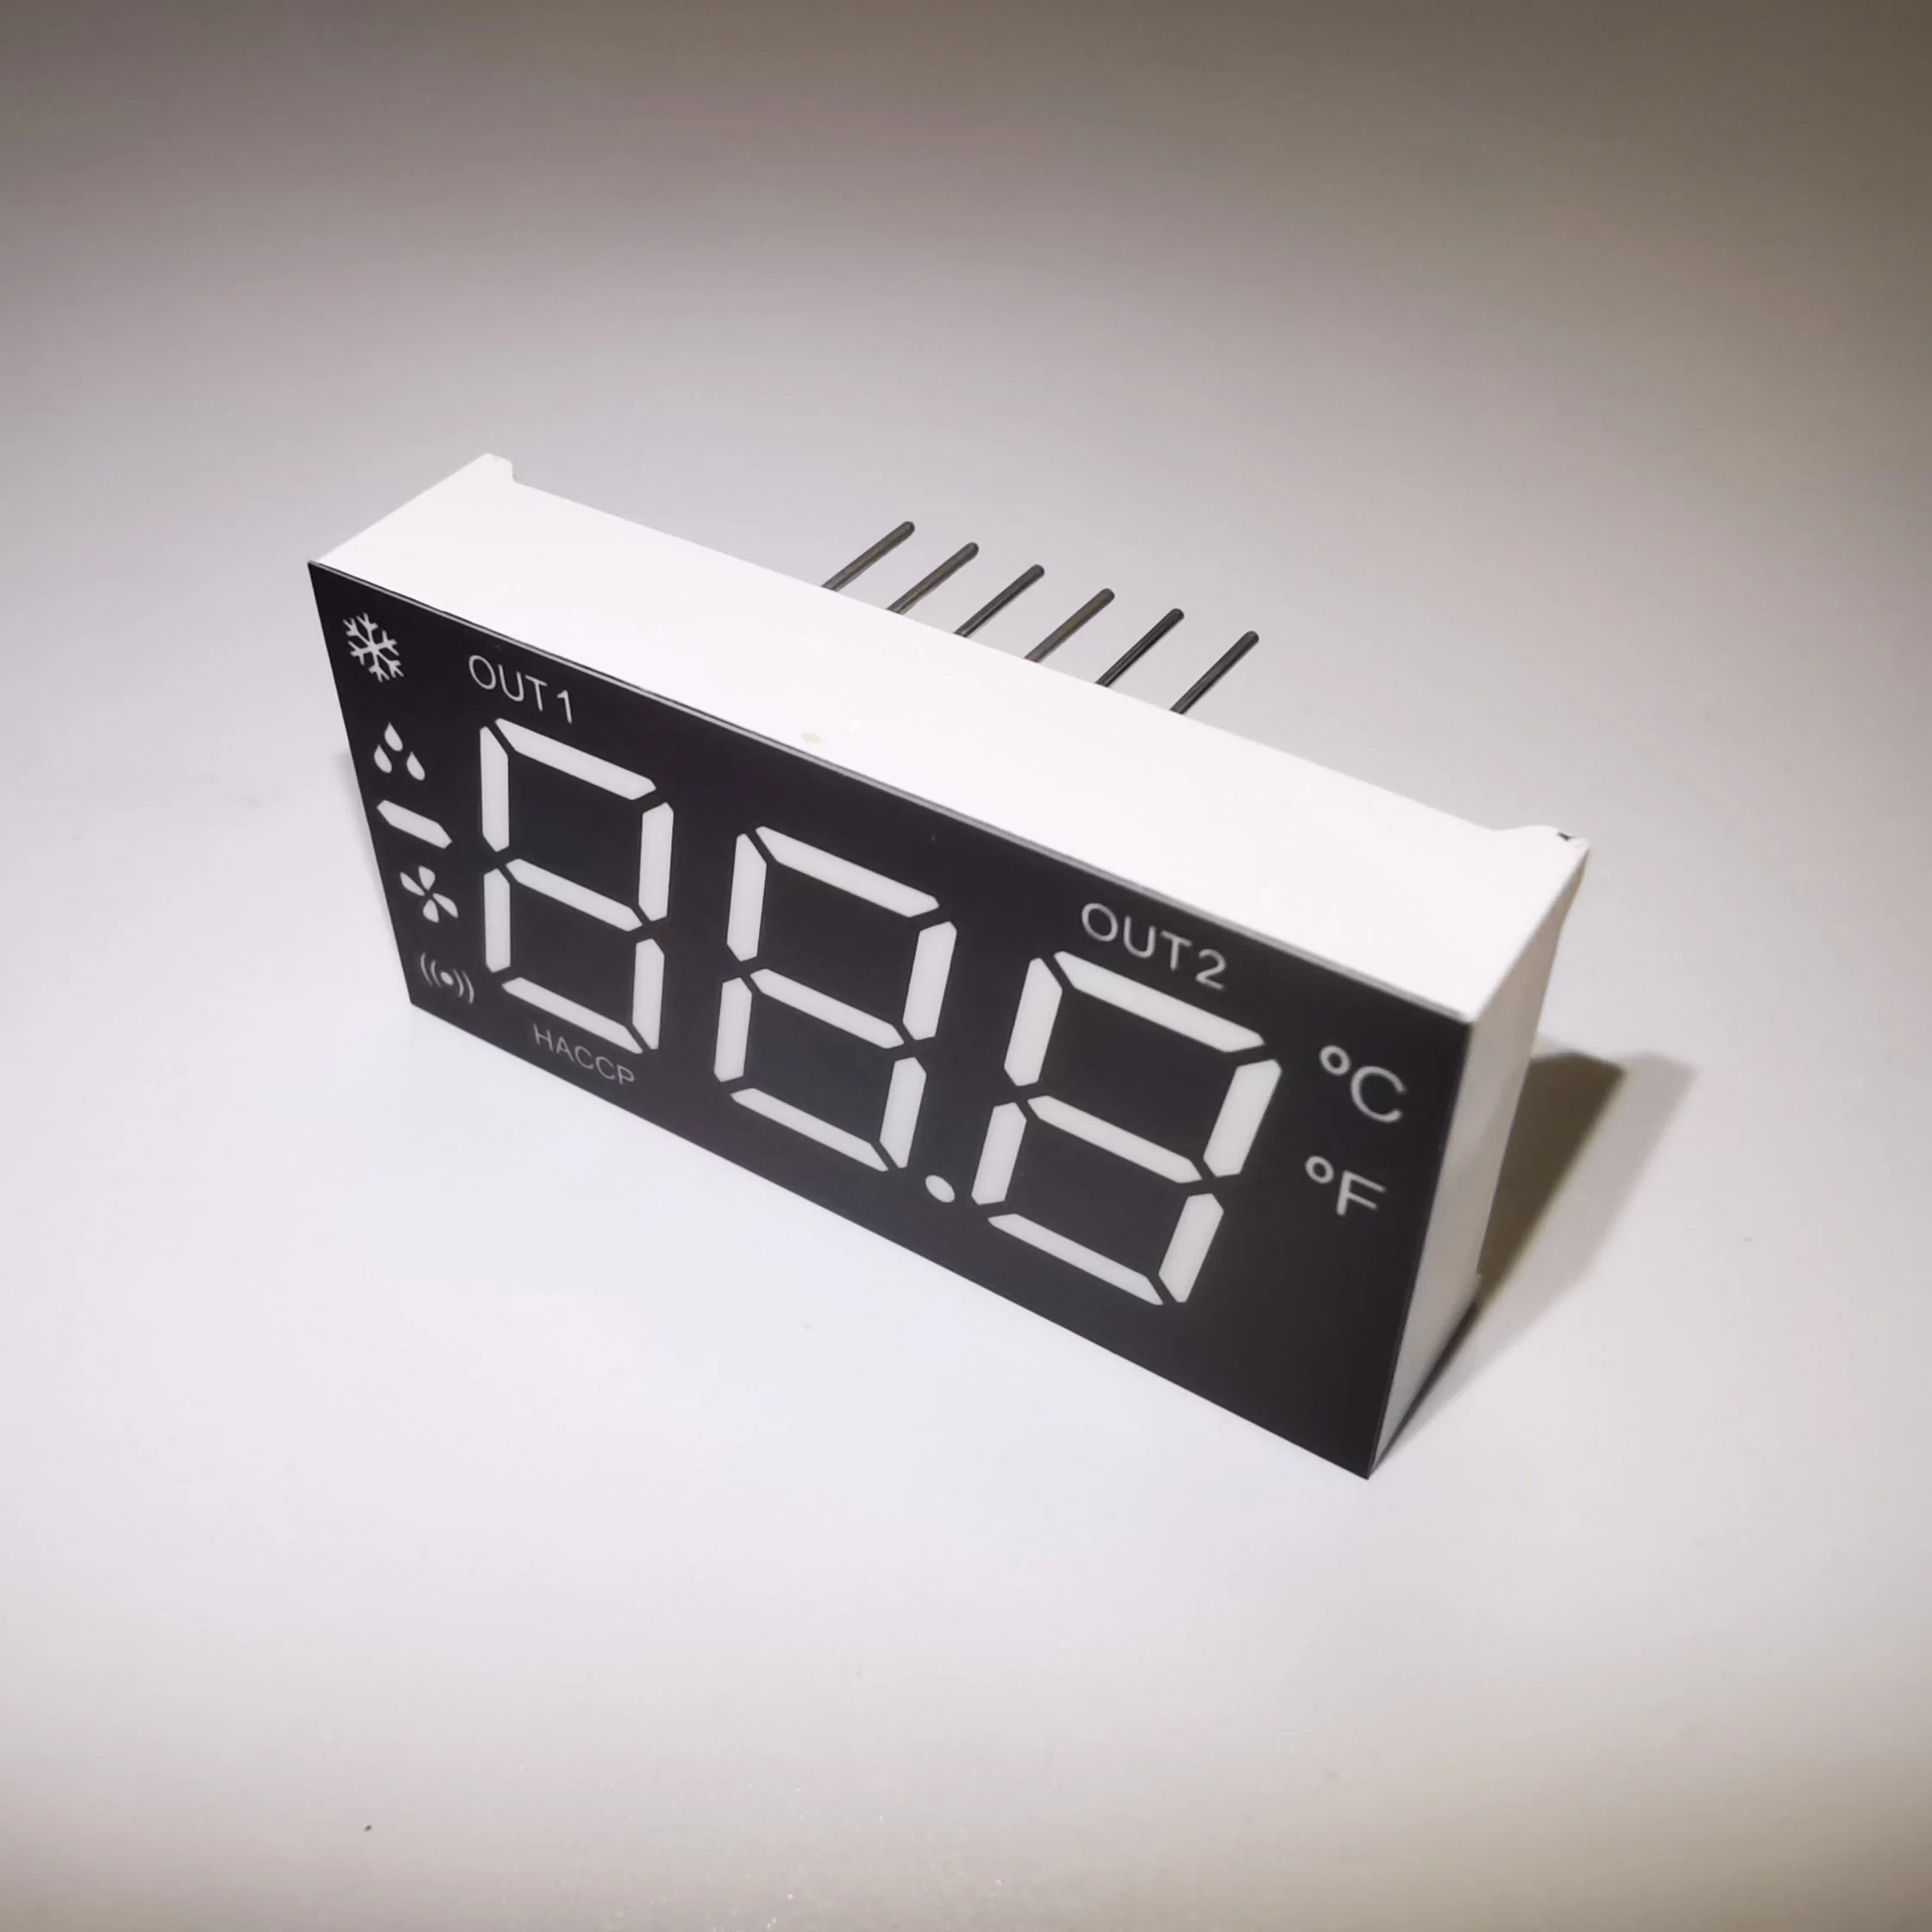 Bright White Customized 3digit 0.5inch Seven Segment LED Display for Refrigerator Control